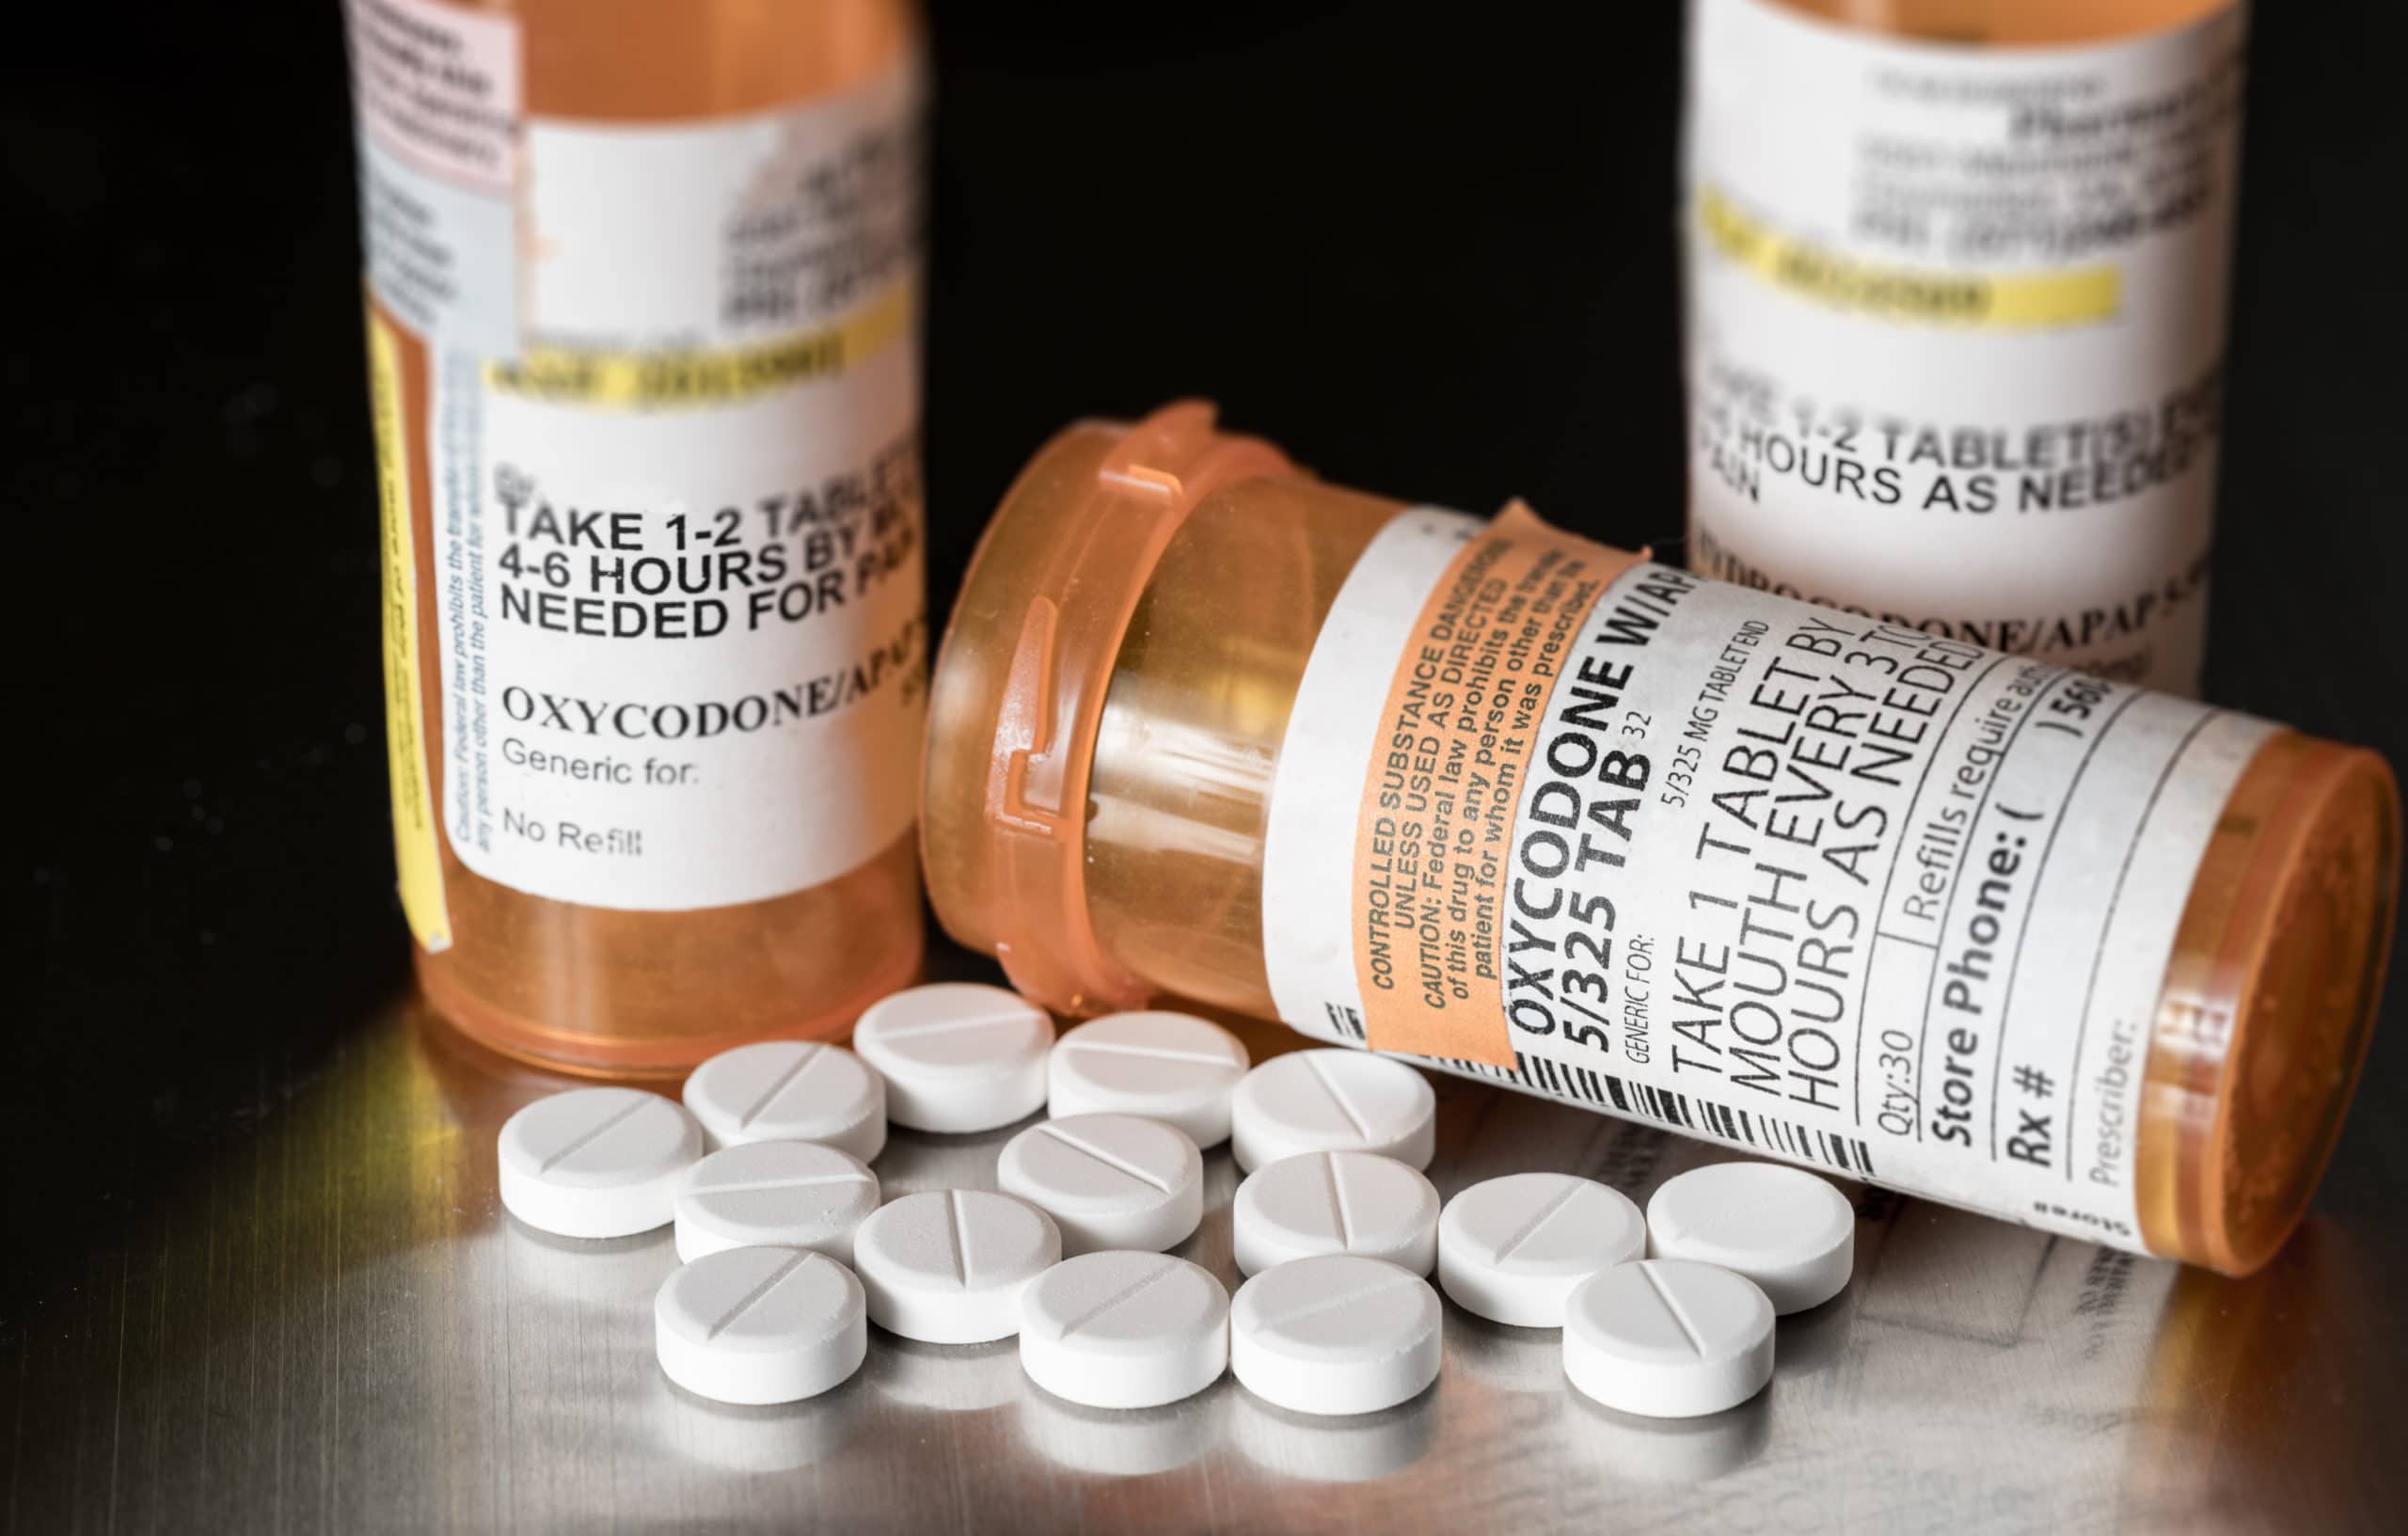 Bottle of opioids - subject of Cuyahoga County Opioid trial